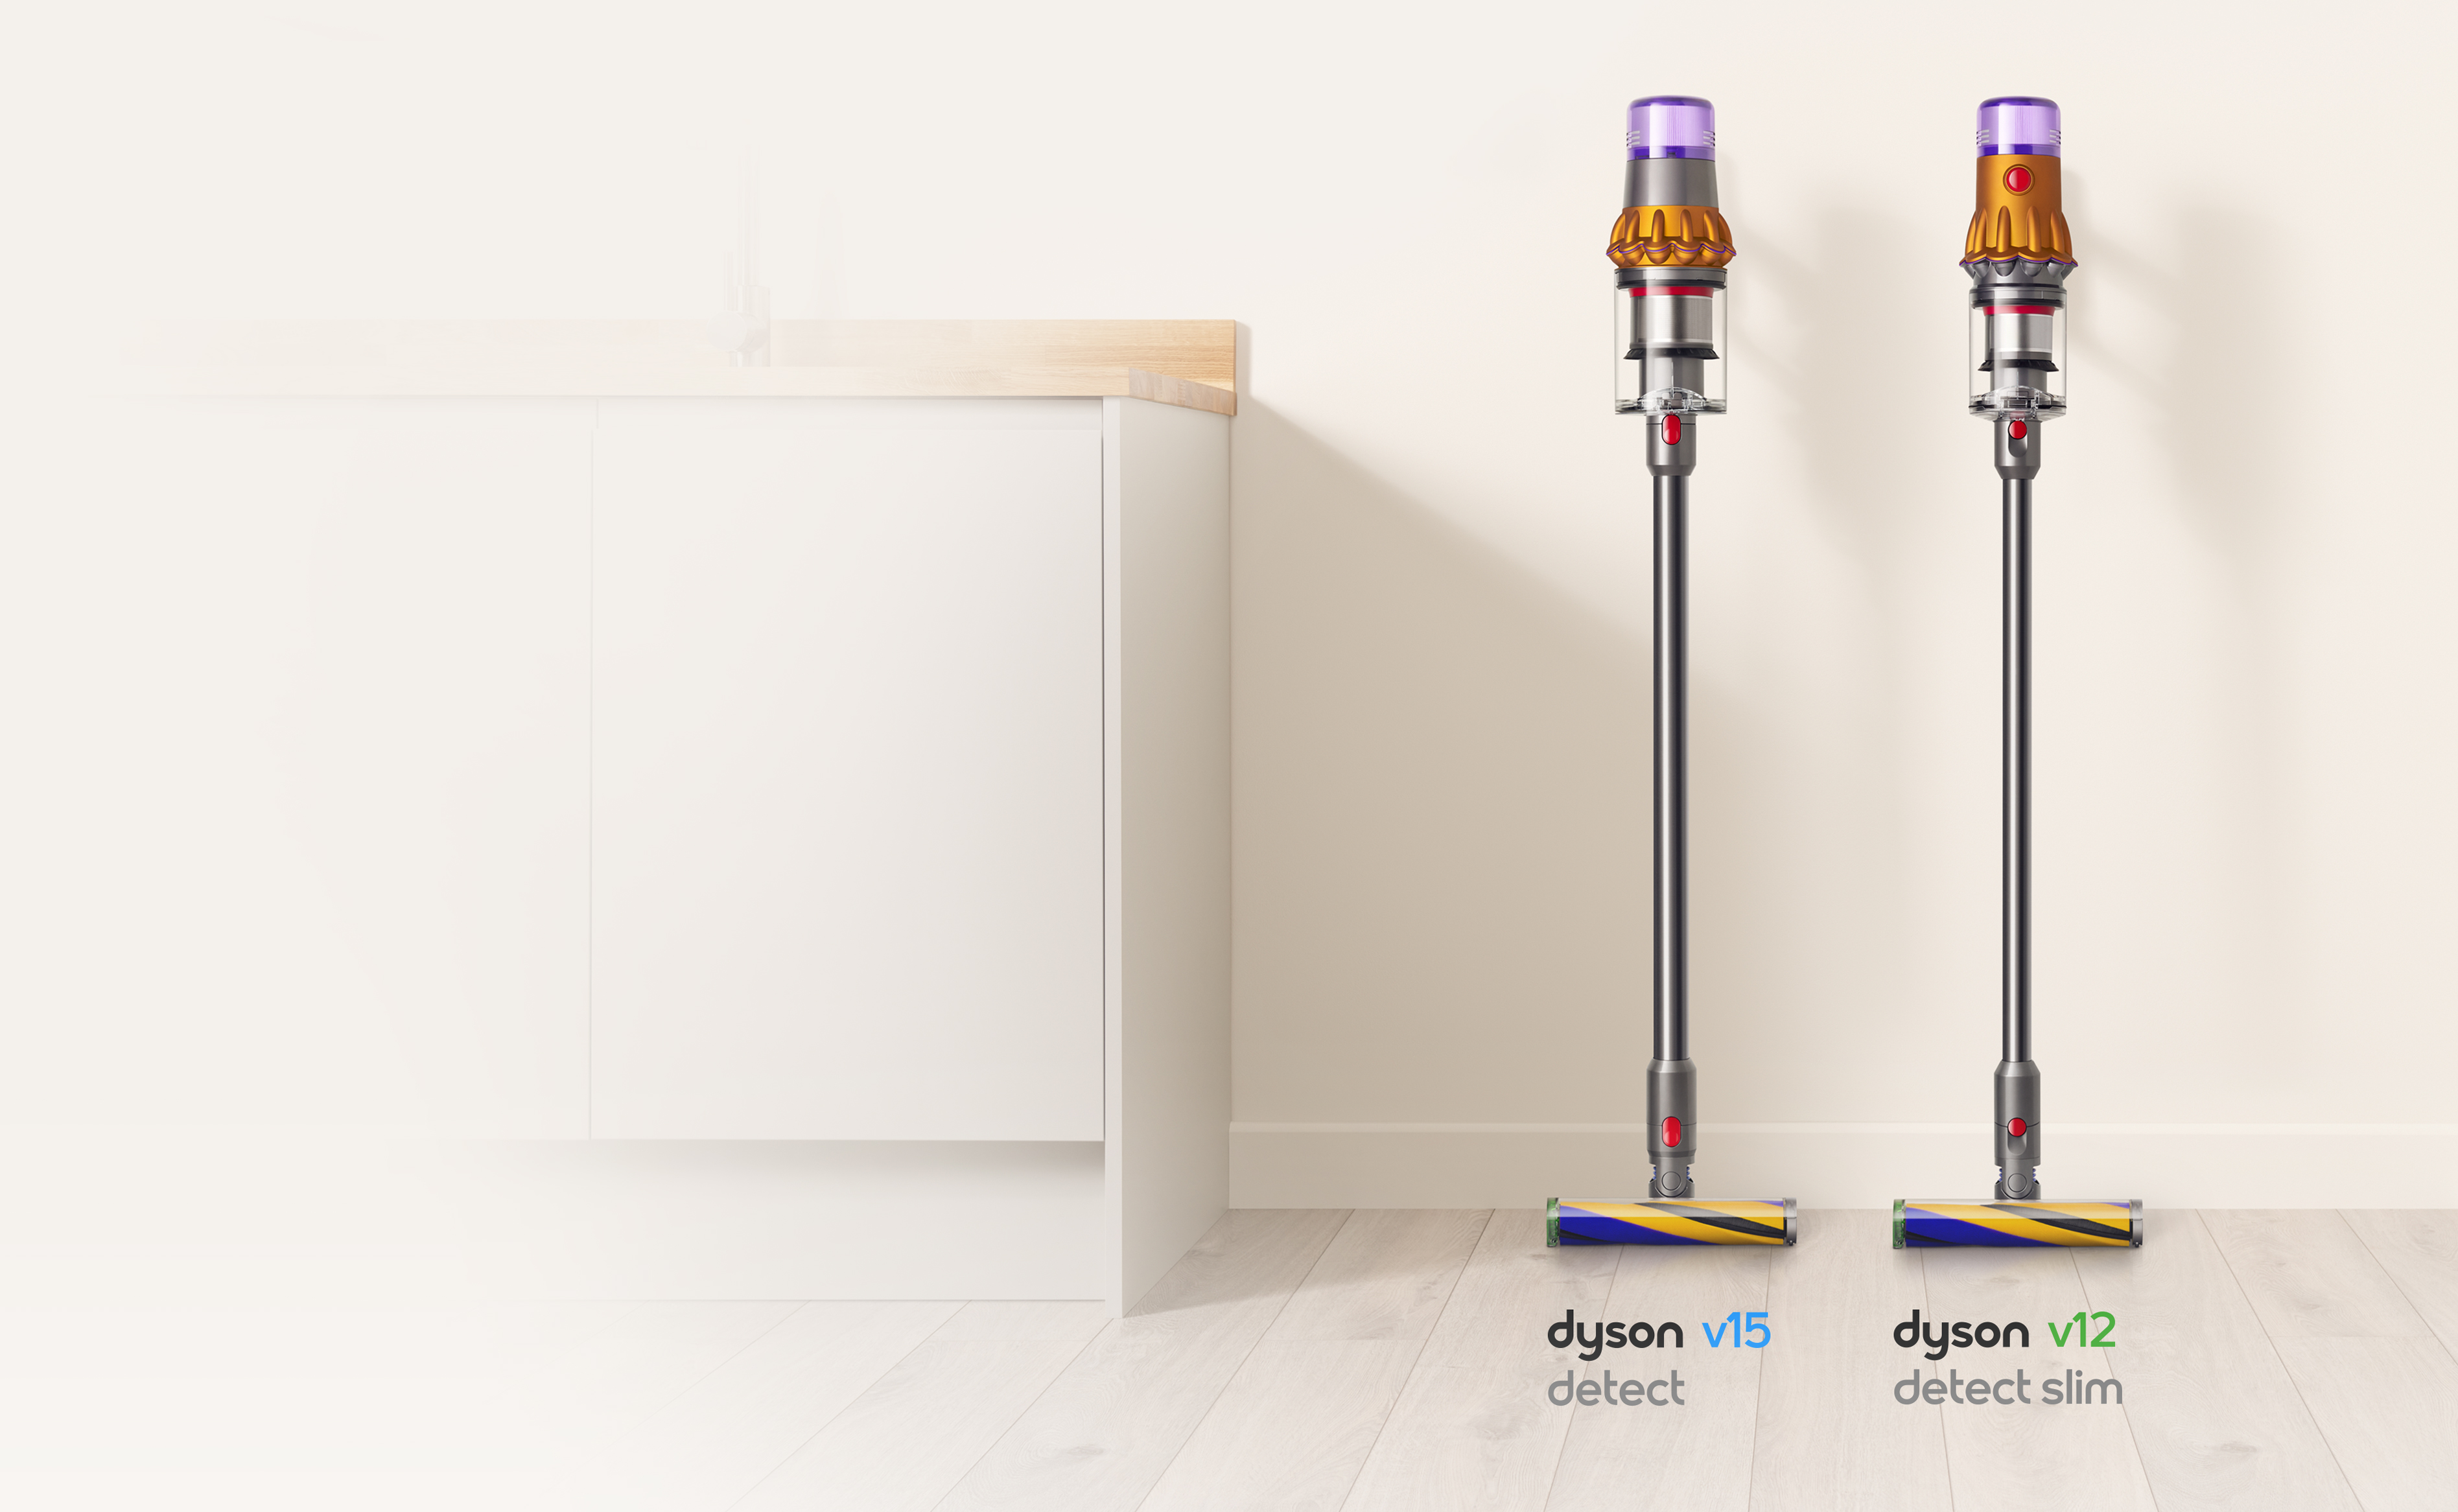 Dyson V15 Detect and Dyson V12 Detect Slim vacuums side by side